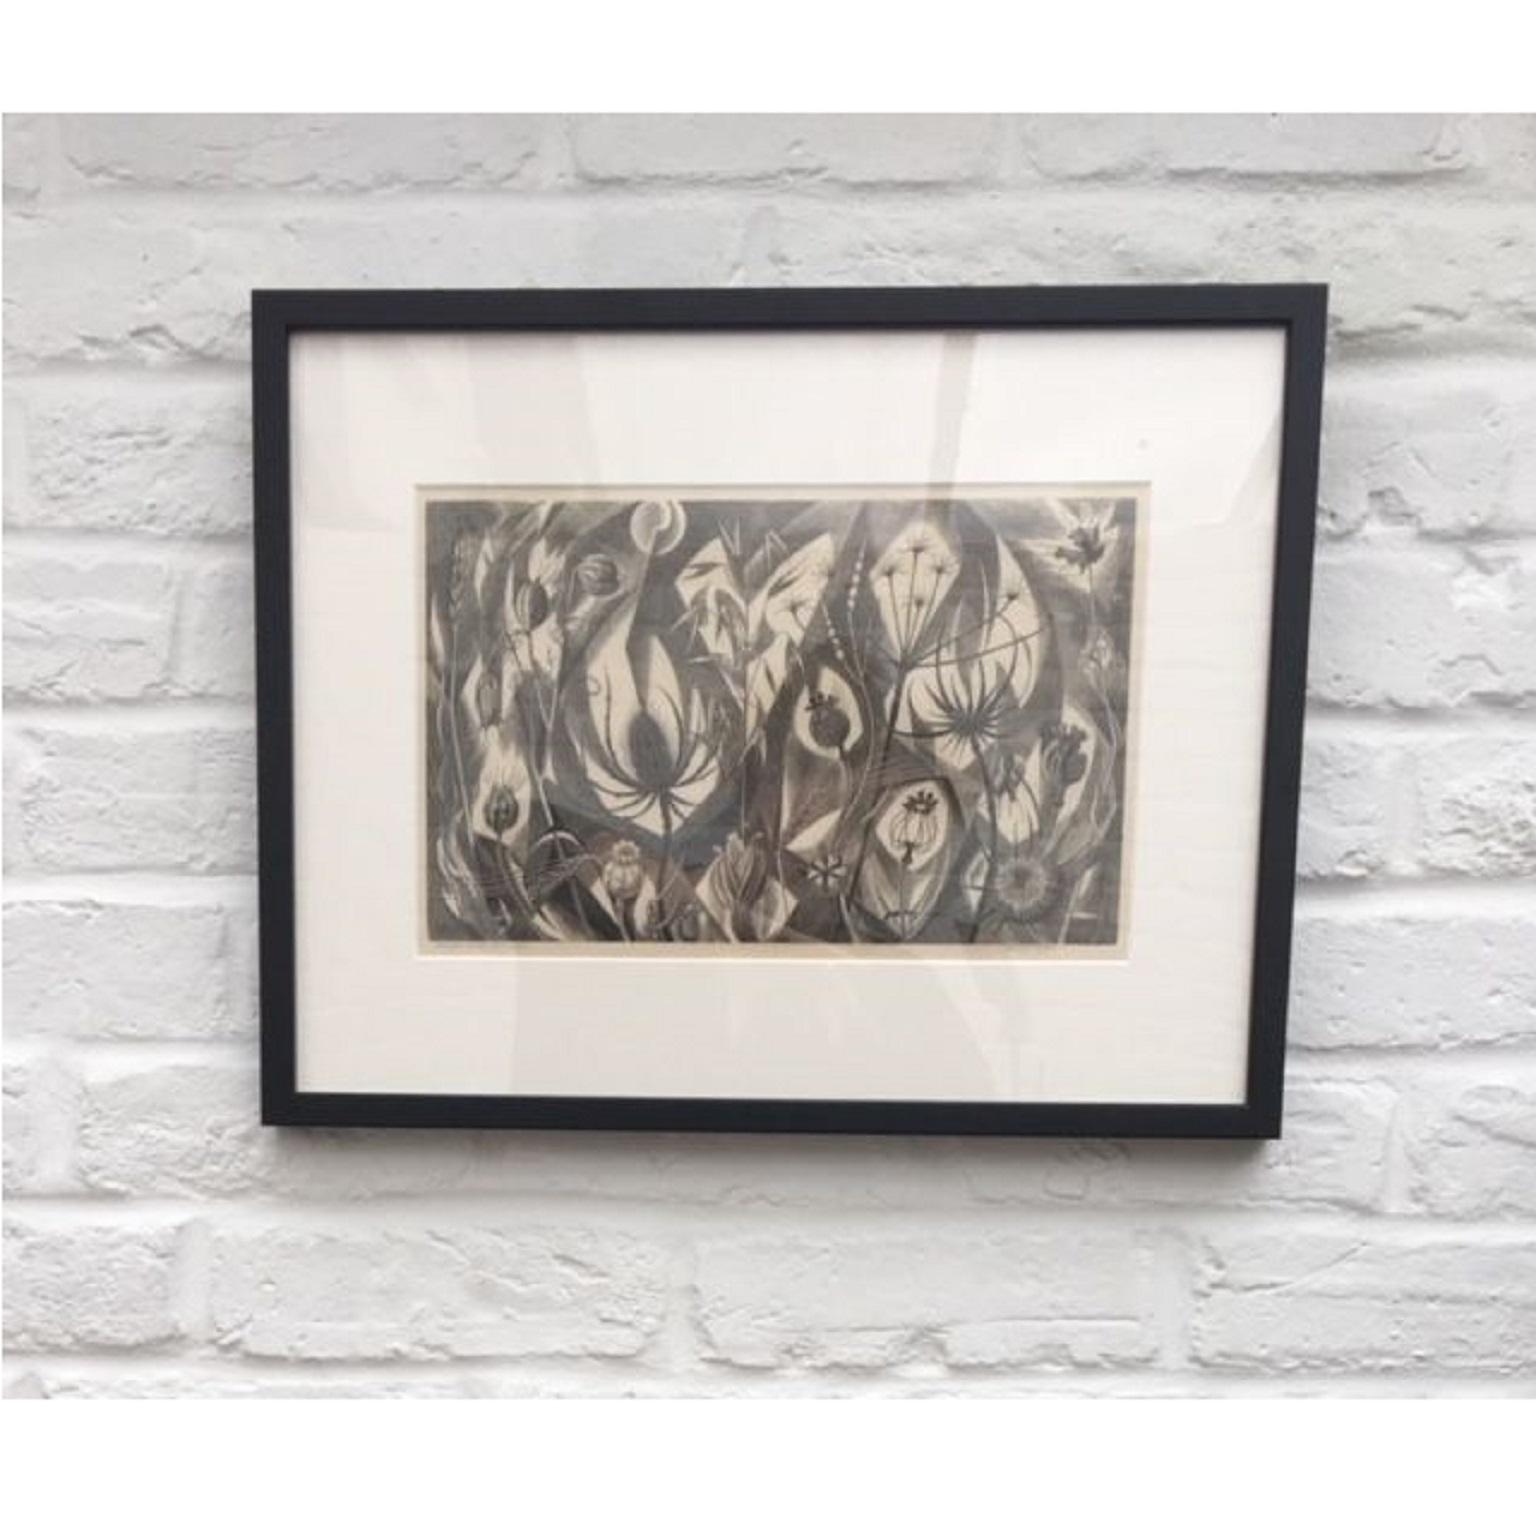 Artwork by Monica Poole ‘Designs with Pericarps’ woodcut, circa 1960

Artist: Monica Poole – (1921-2003)
Title: Design with Pericarps, Circa 1960s
Medium: Woodcut on white Japanese paper
 Mounted on 100% cotton, acid-free board.
 Inscribed